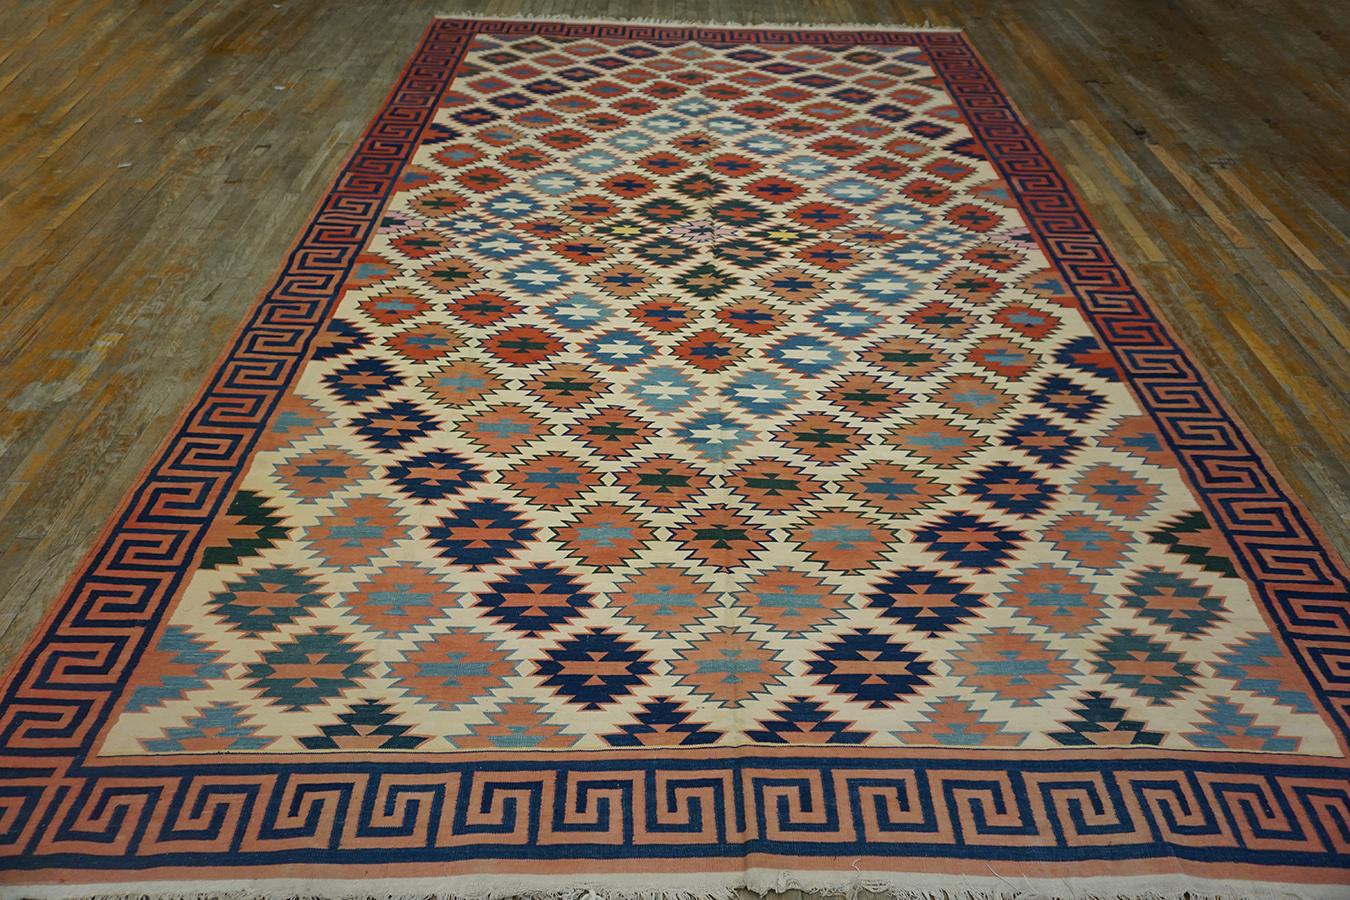 Tapis Dhurrie ancien, taille : 8' 9''x 13' 8''.